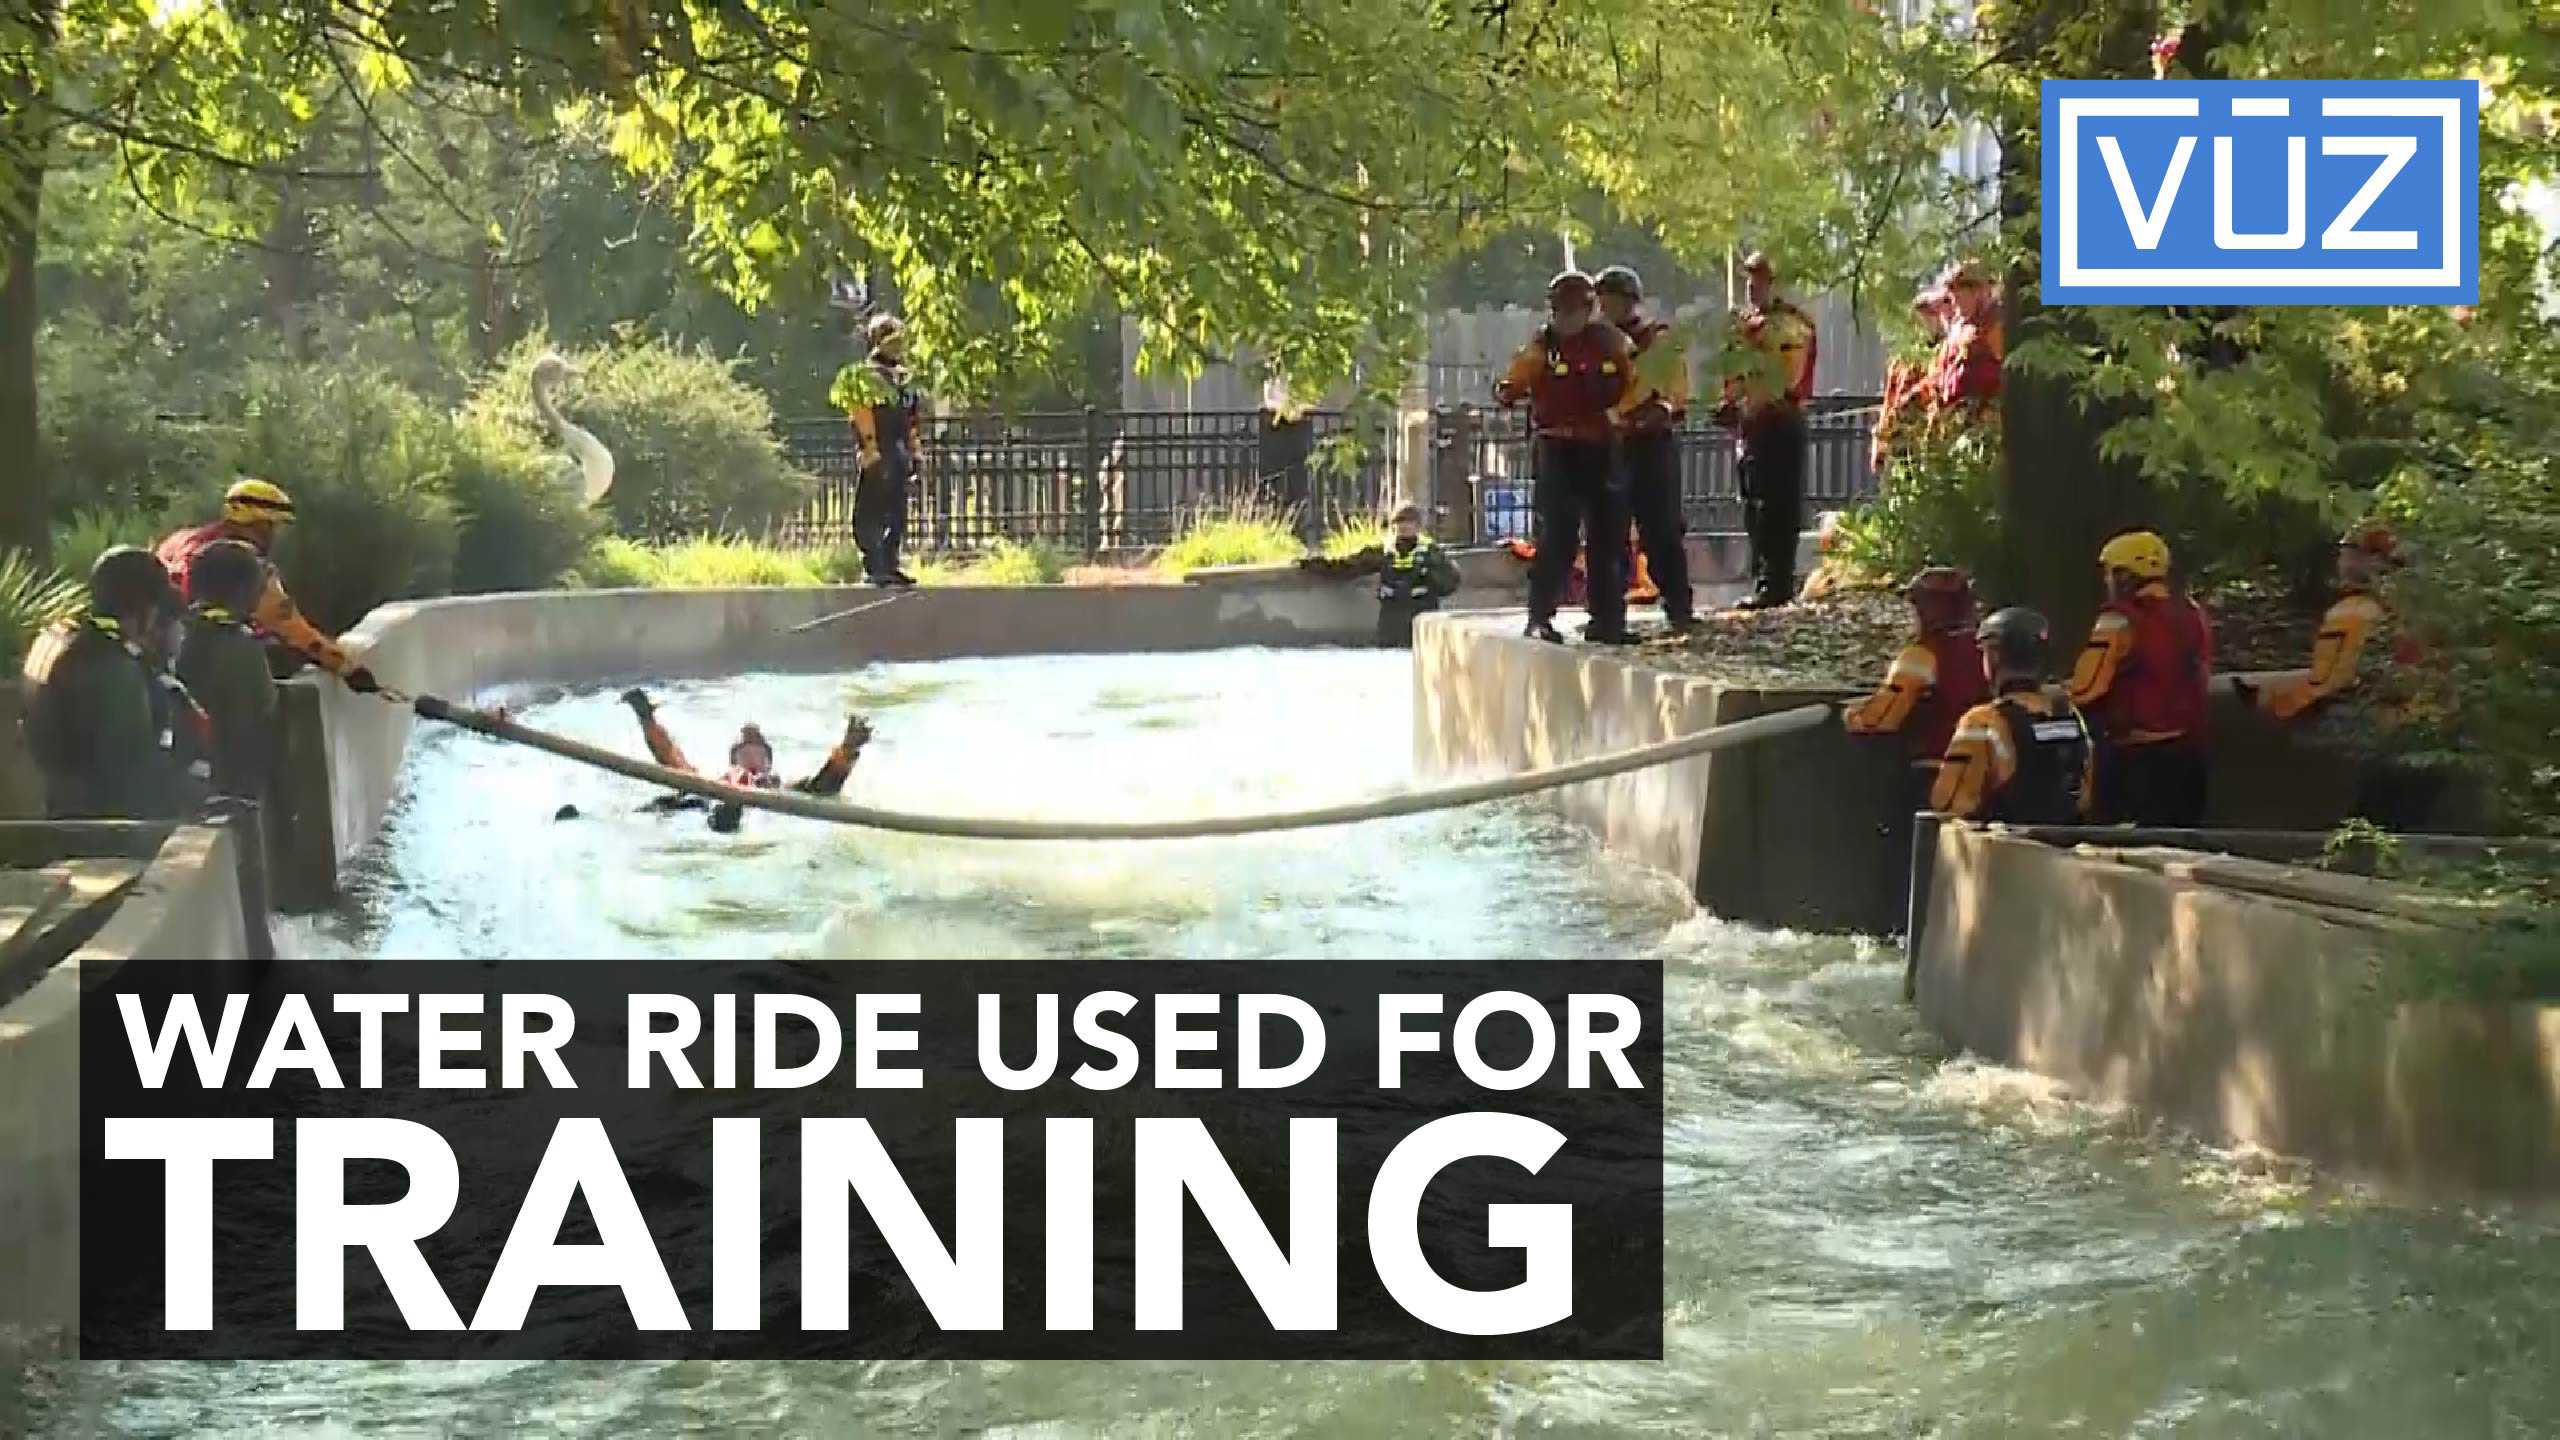 Theme park ride used for rescue team training